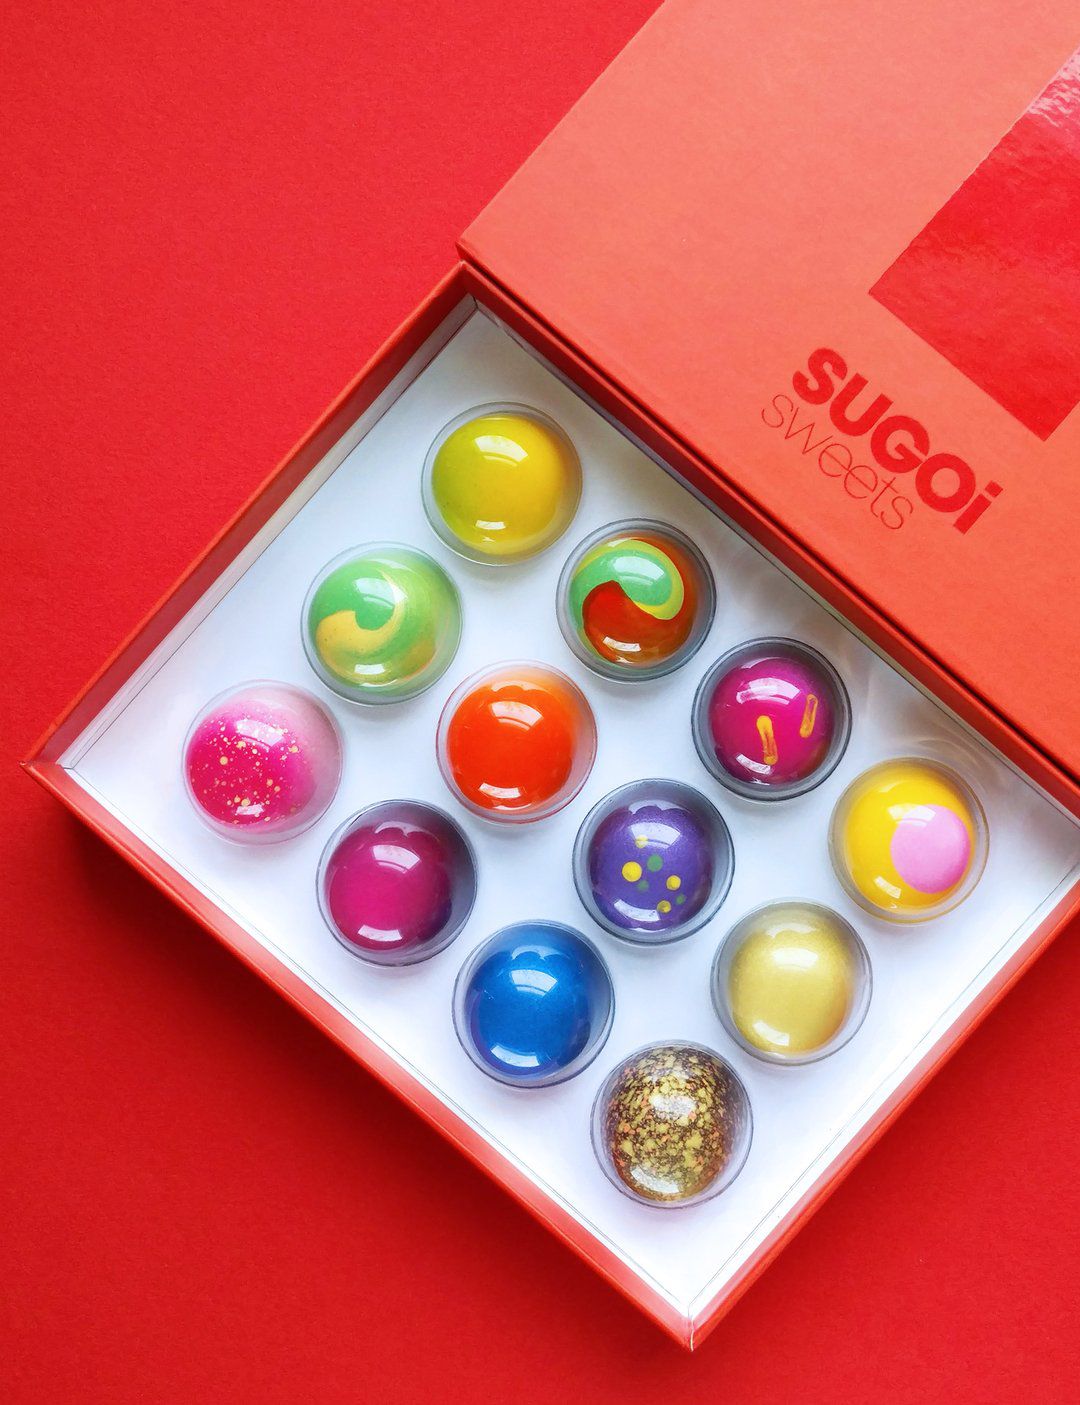 A red box filled with colorful bon bons.